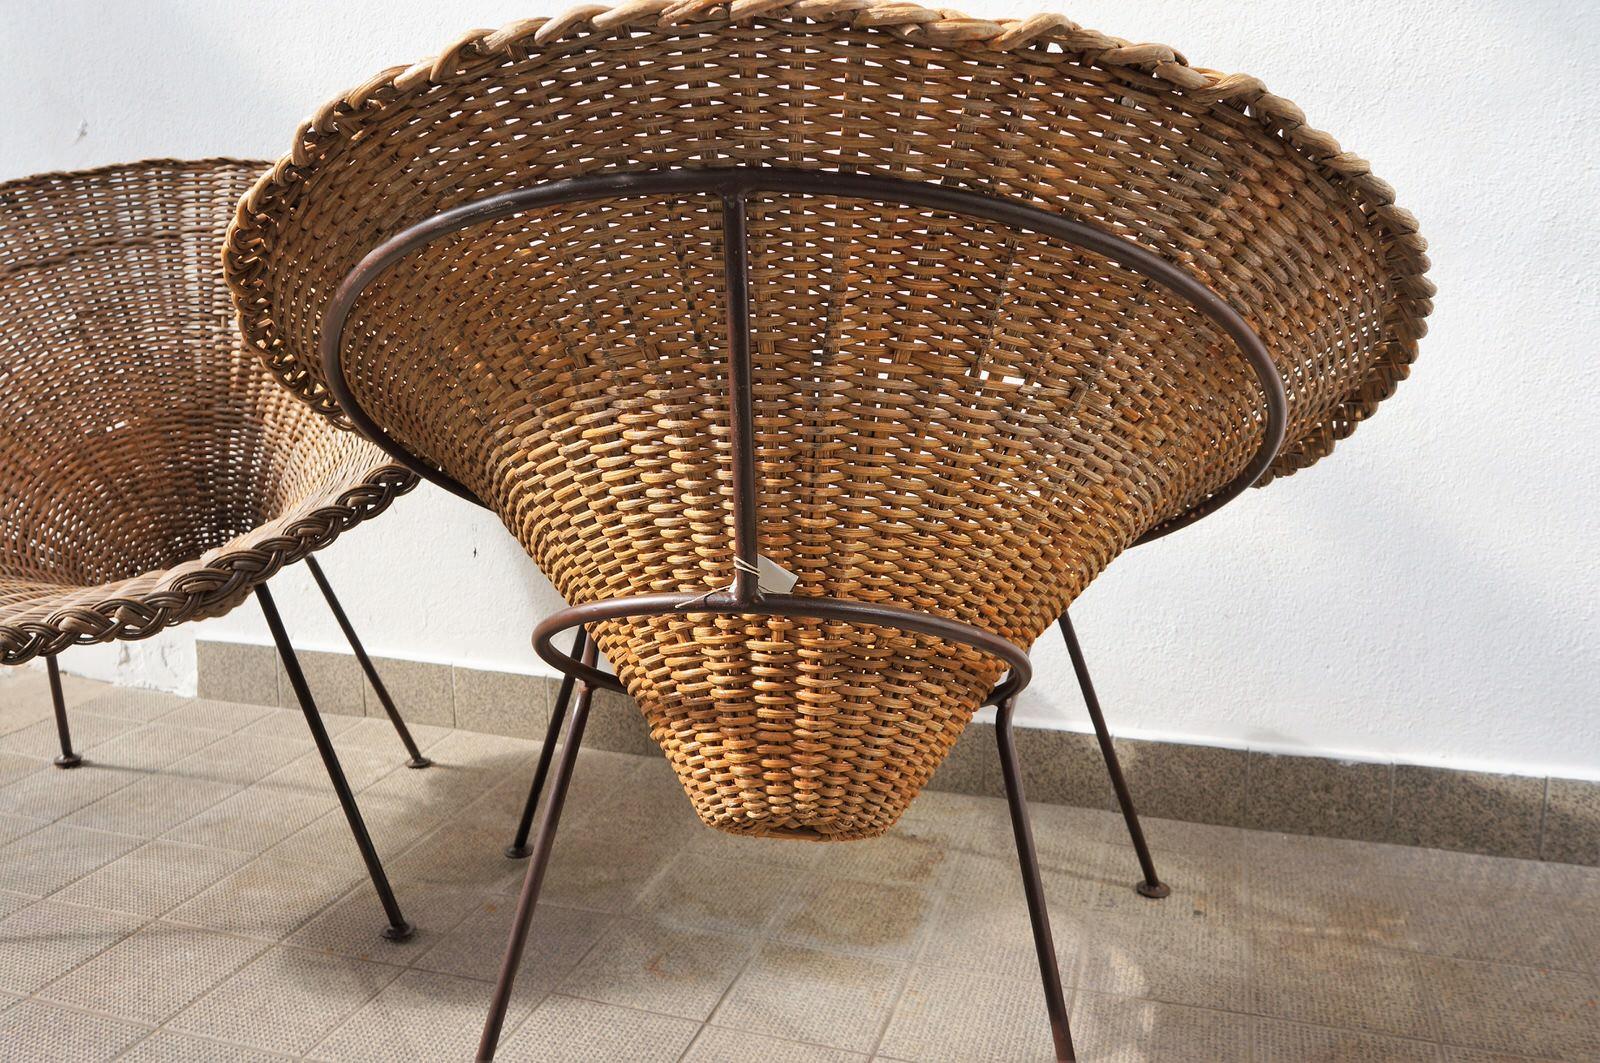 Large pair of sunflower-shaped rattan terrace chairs. The 4 leg base is polished iron rod and the saucer wicker sunflower is detachable for easy storage. Extremely comfortable & in excellent condition.